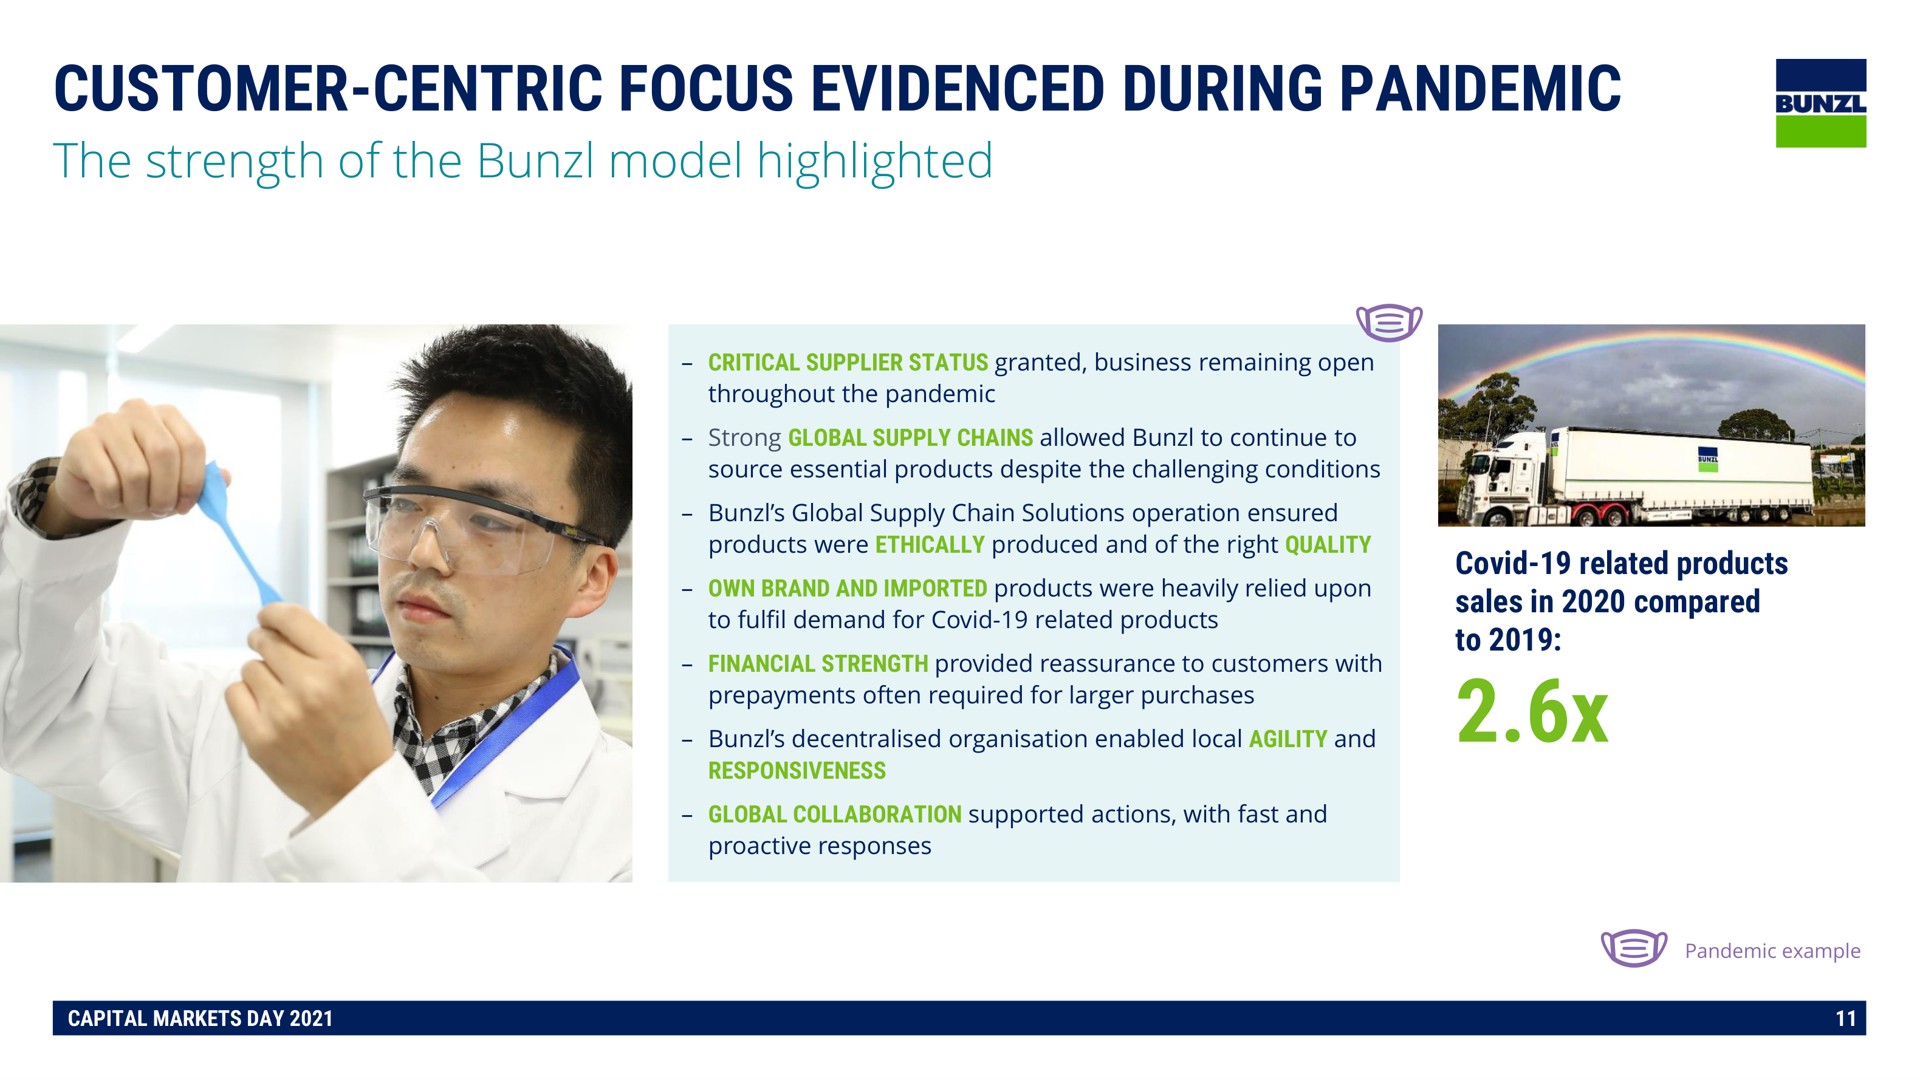 customer centric focus evidenced during pandemic | Bunzl